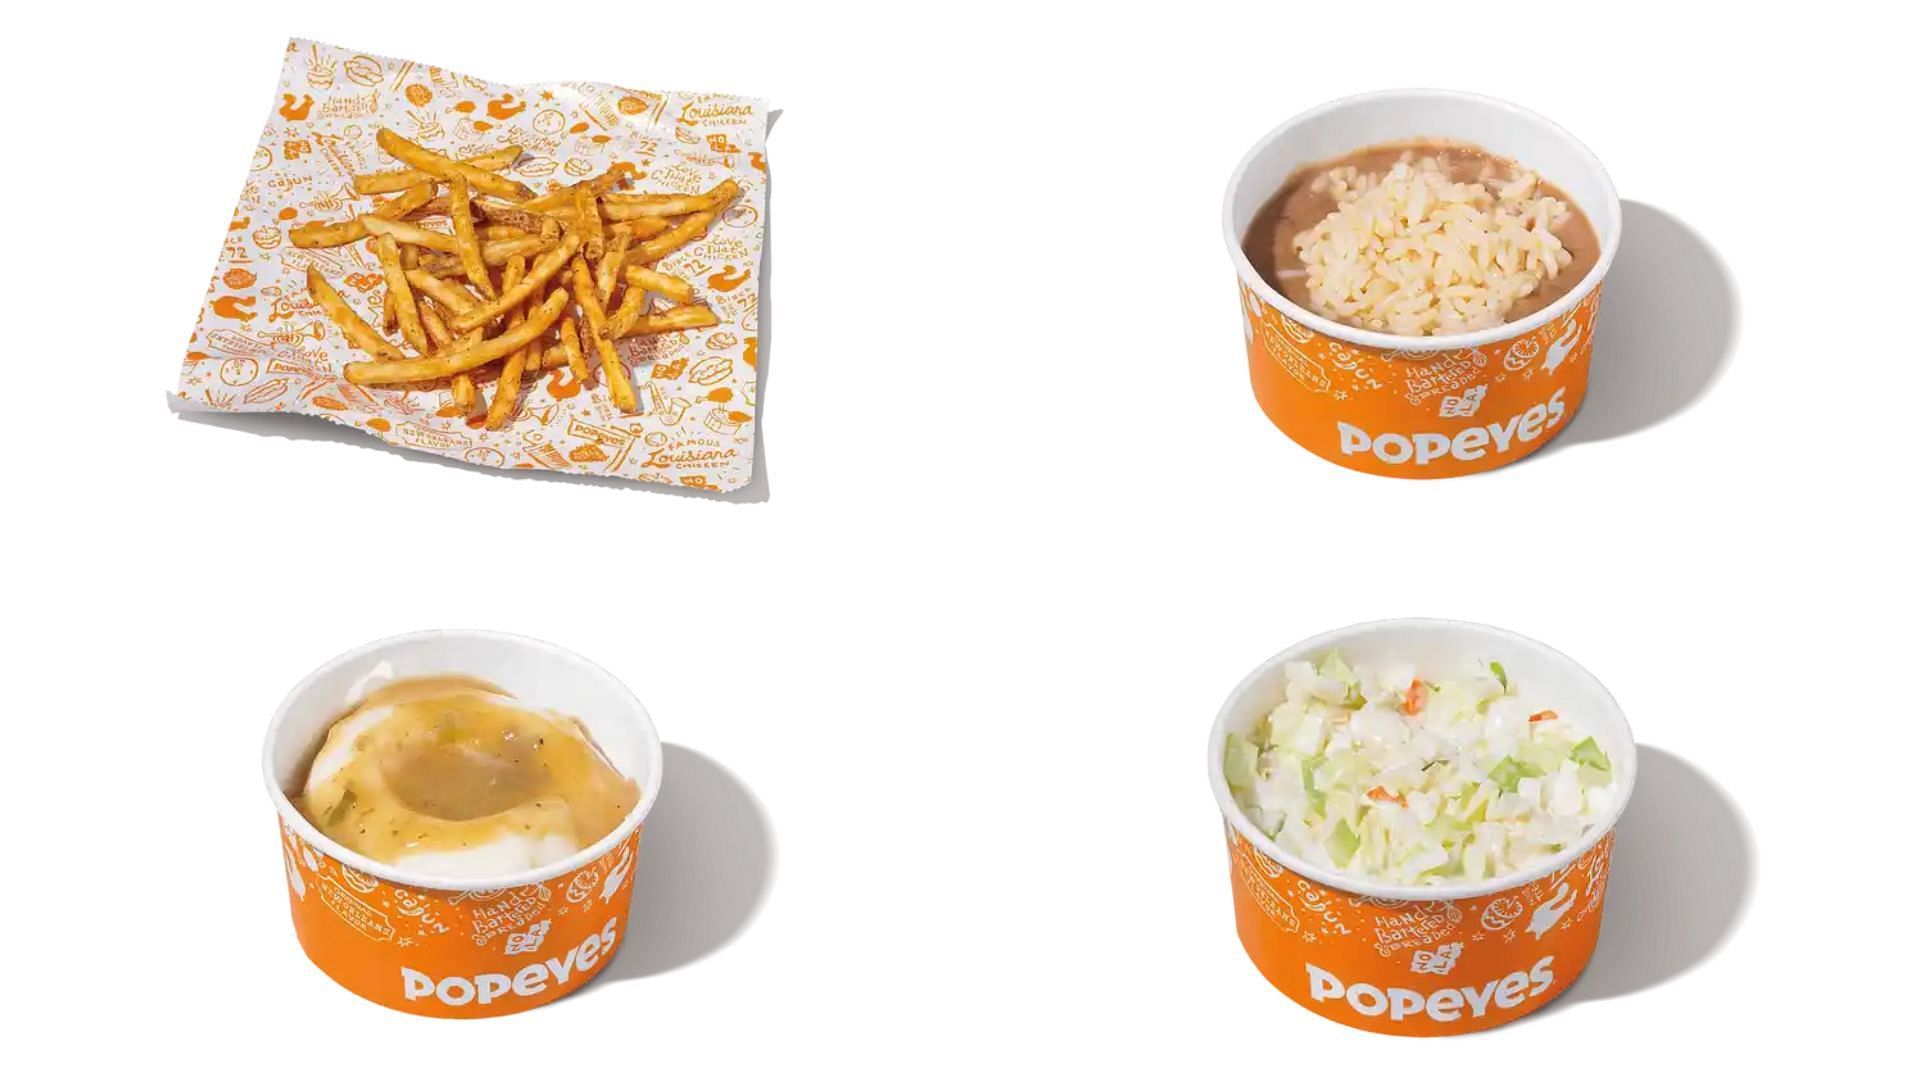 Cajun fries, red bean and rice, mashed potatoes with cajun gravy, and coleslaw (Image via Popeyes)